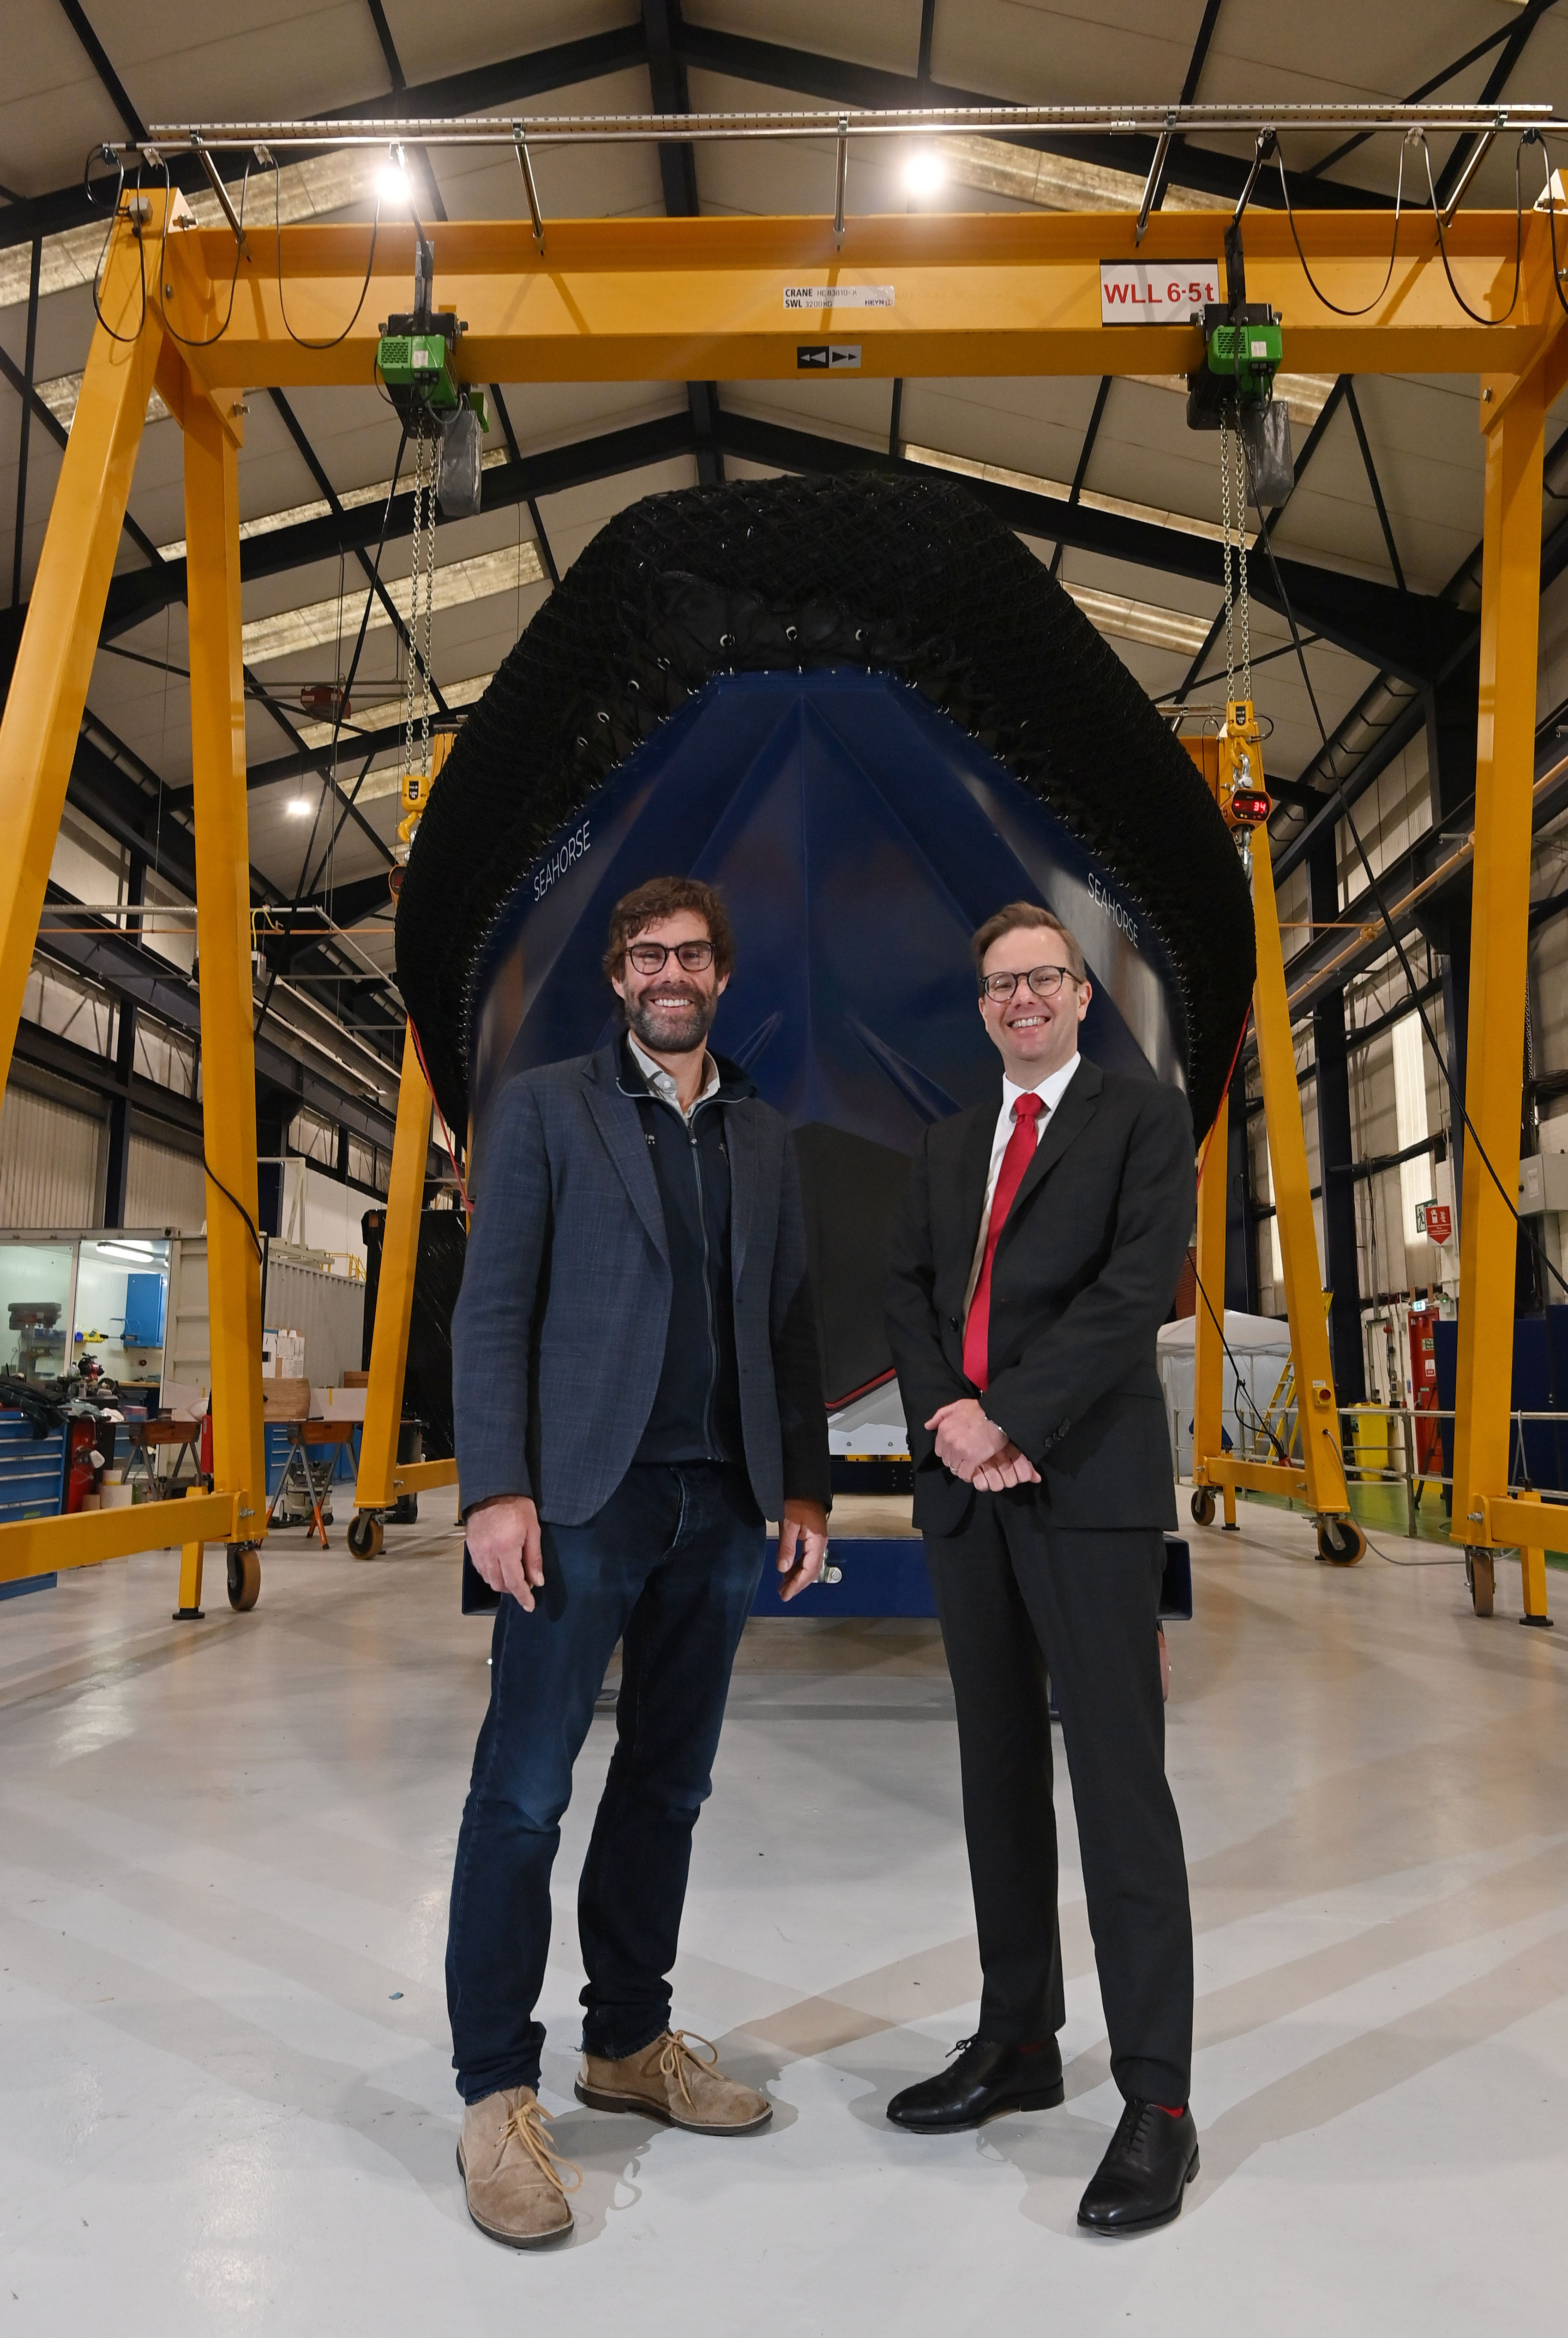 Dr Iain Percy OBE, CEO and Founder of Artemis Technologies and Elwyn Dop, Condor’s Operations Director, with the first Artemis eFoiler(R) propelled prototype, an 11m workboat.